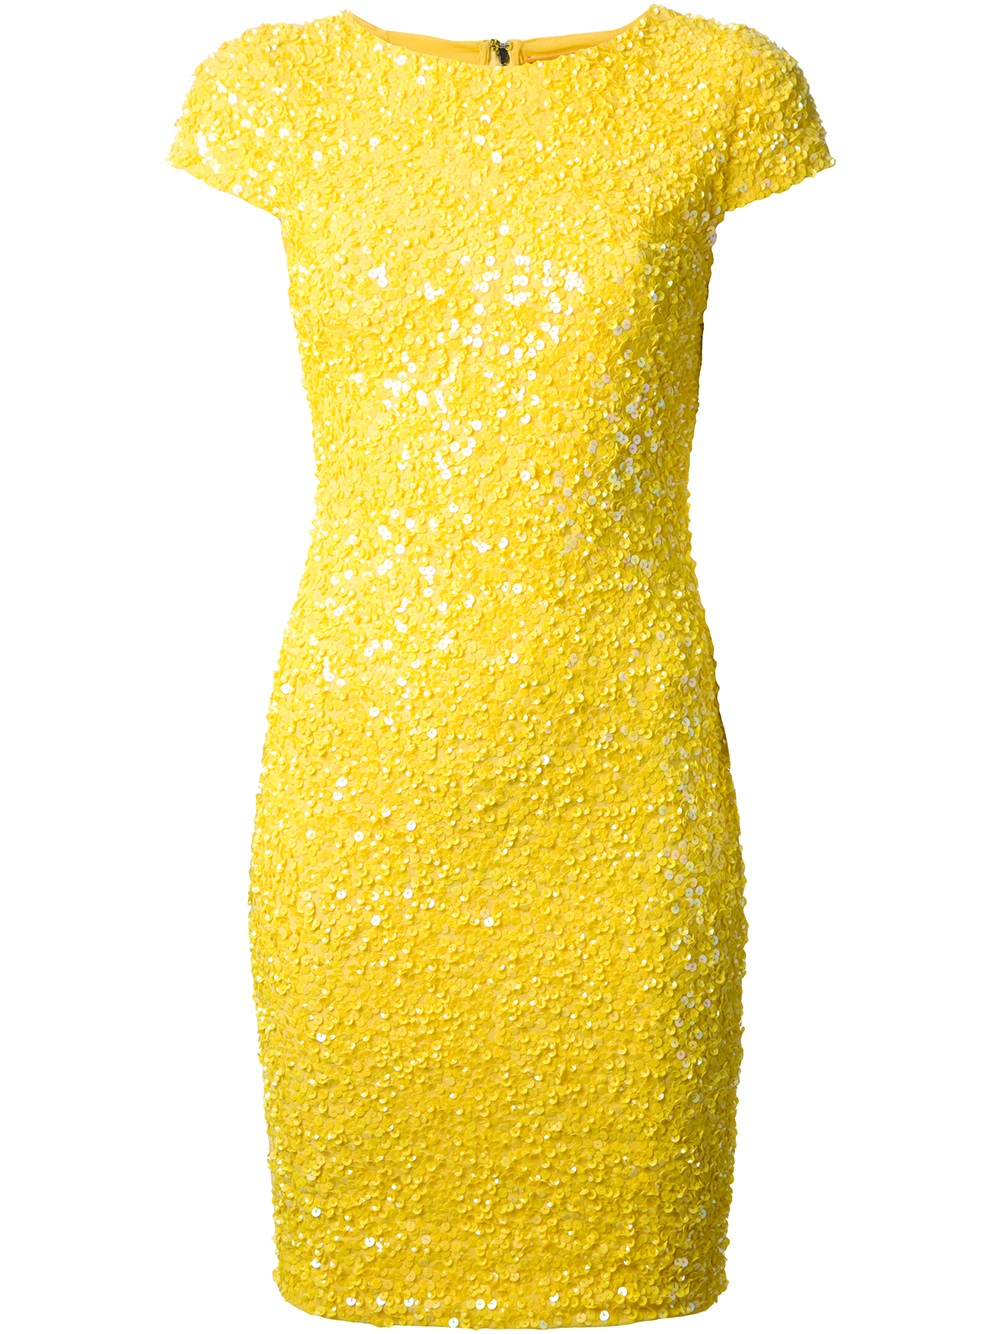 Lyst - Alice + Olivia Sequin Detail Dress in Yellow